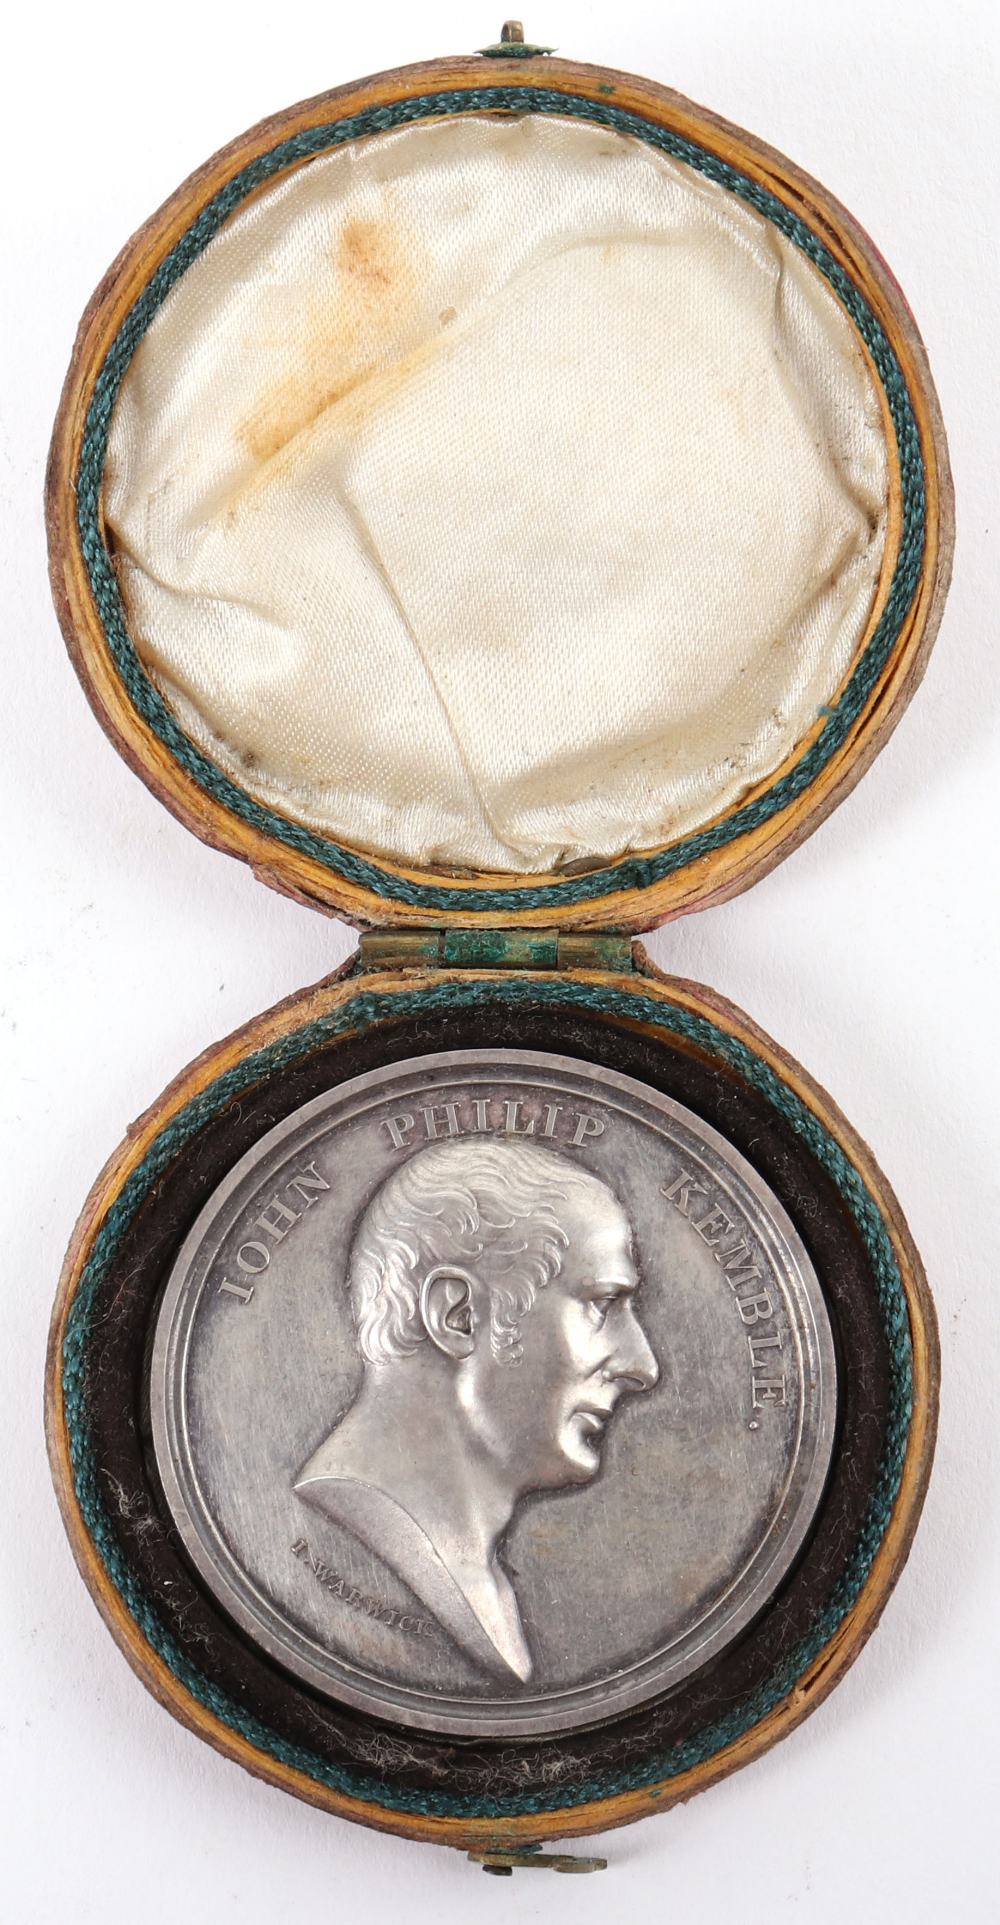 A very rare George III Theatrical silver medal for John Philip Kendle